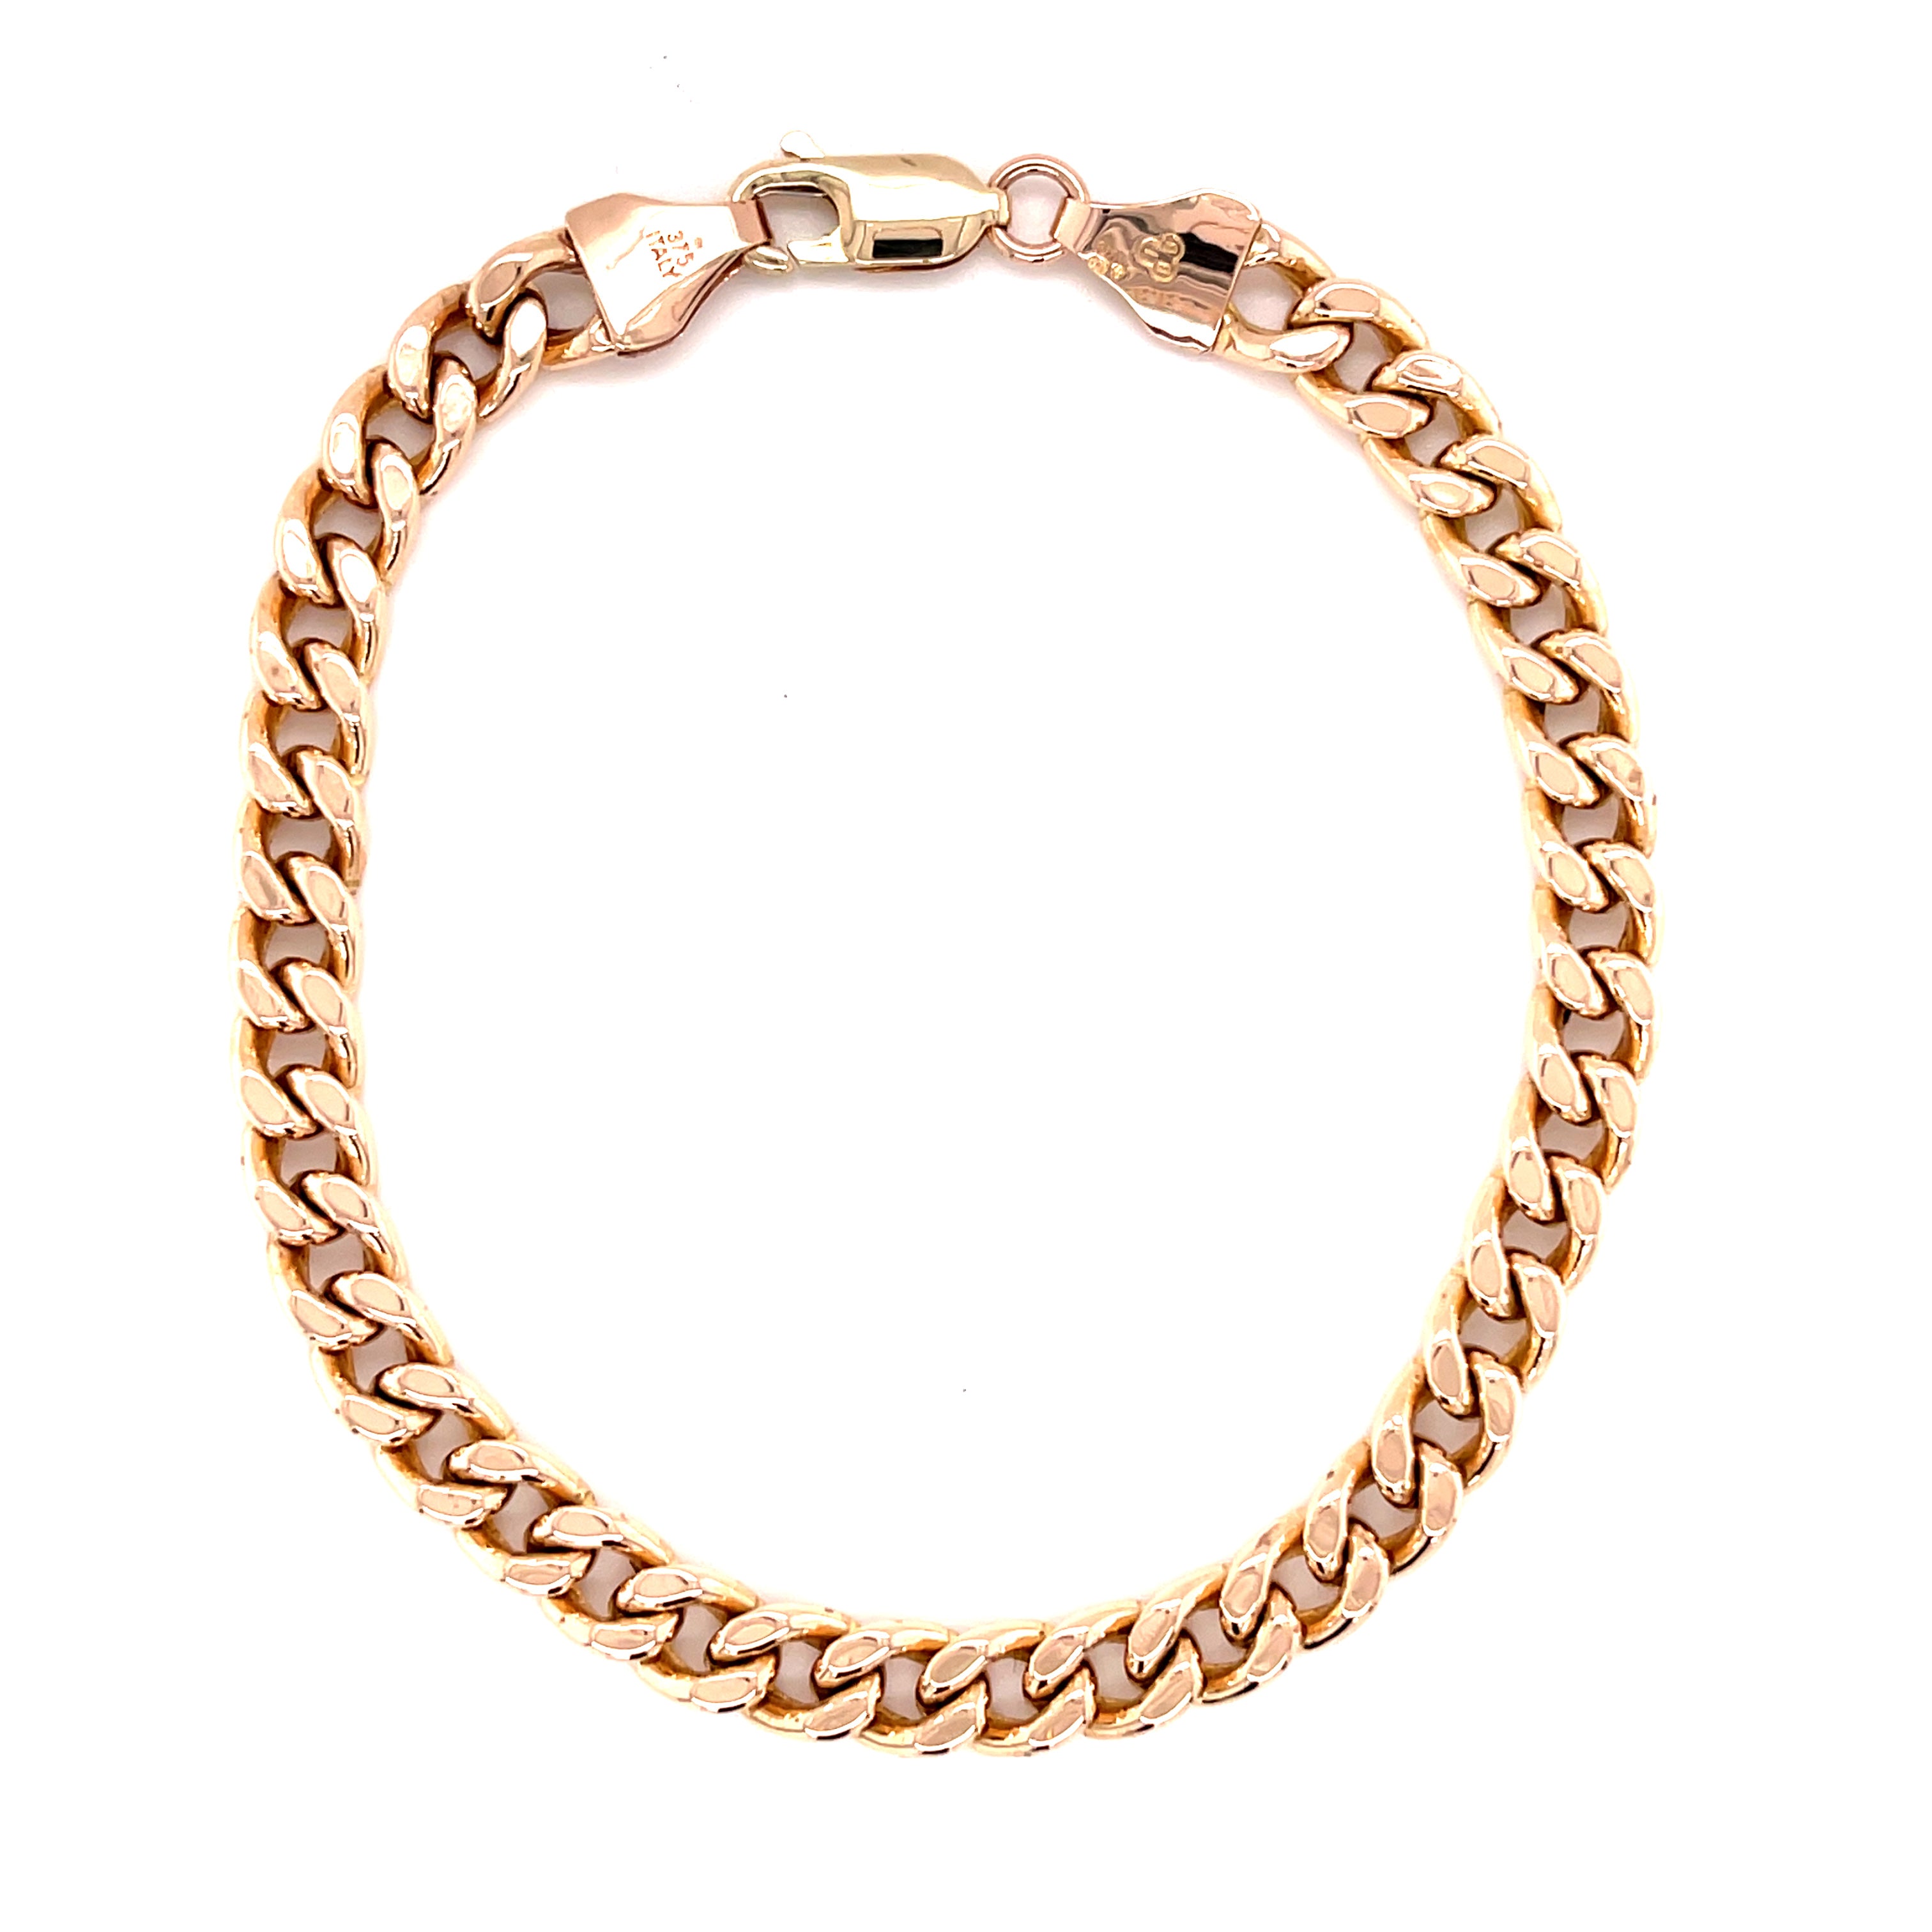 9ct Yellow Gold 8 Inch Hollow Vintage Curb Link Bracelet - 10.05g